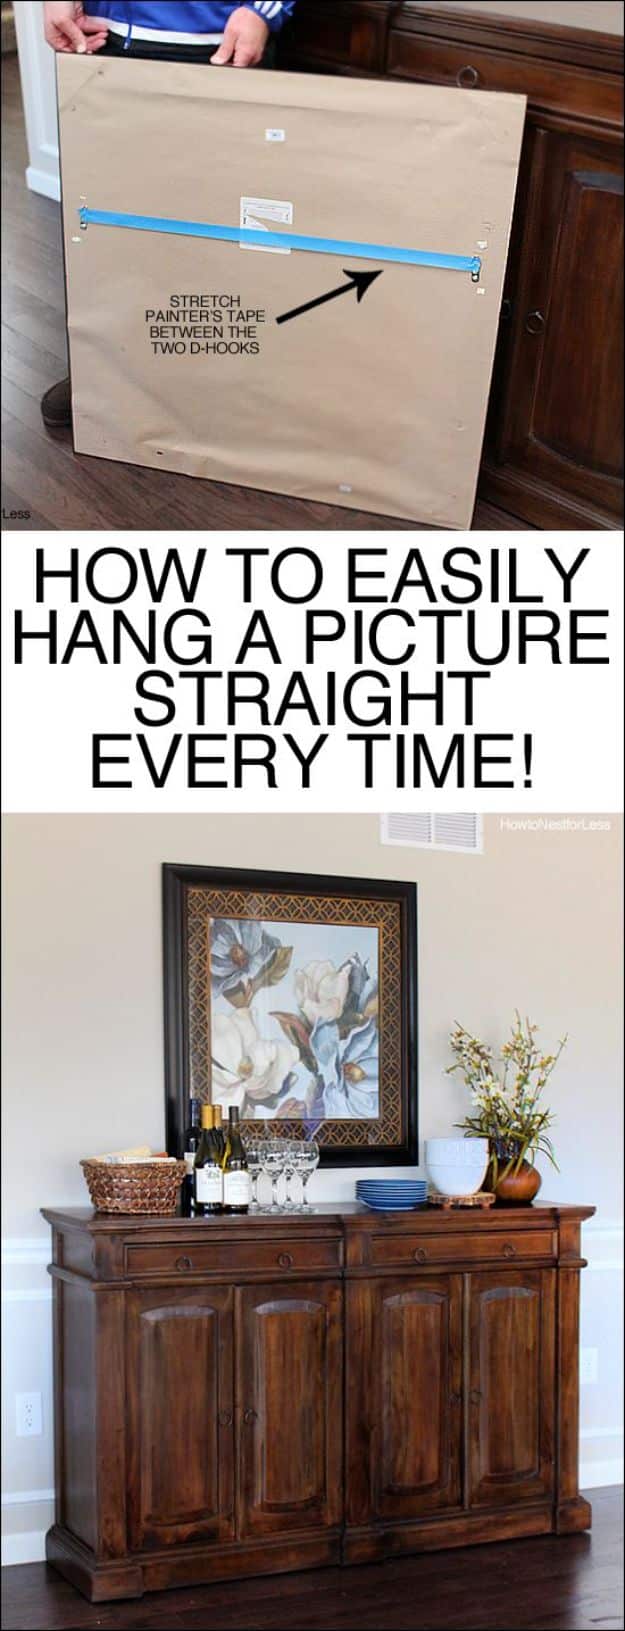 Tips and Tricks for Hanging Photos and Frames - Easily Hang a Picture - Step By Step Tutorials and Easy DIY Home Decor Projects for Decorating Walls - Cool Wall Art Ideas for Bedroom, Living Room, Gallery Walls - Creative and Cheap Ideas for Displaying Photos and Prints - DIY Projects and Crafts by DIY JOY #diydecor #decoratingideas